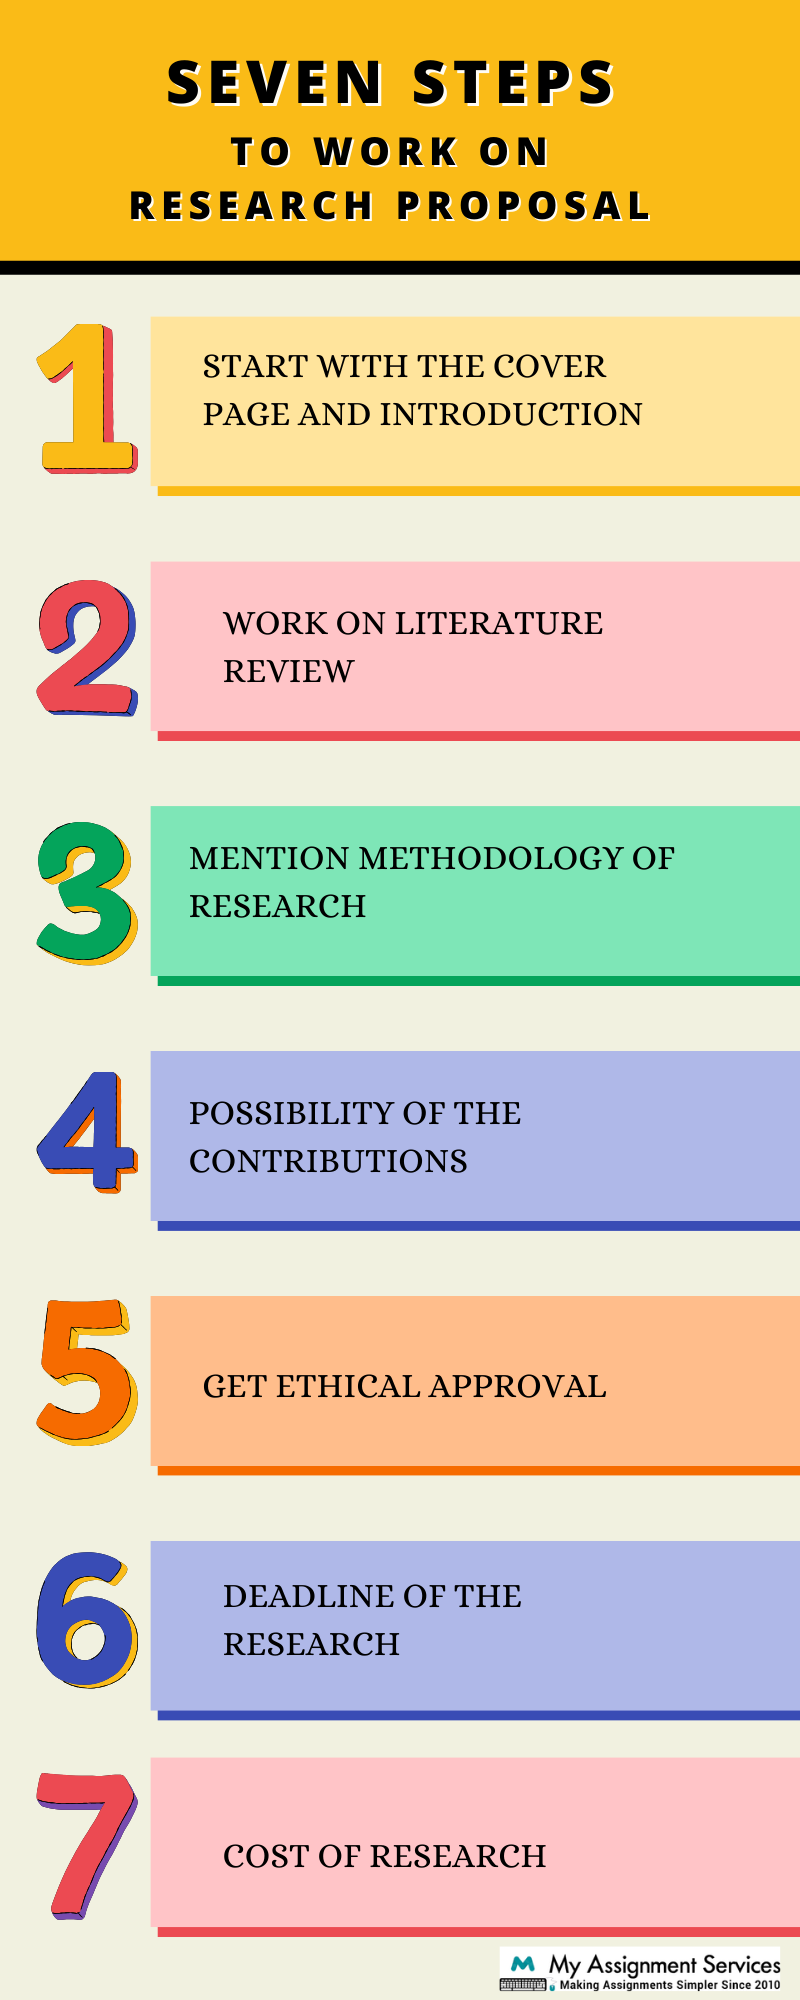 Seven Steps to Work on Research Proposal